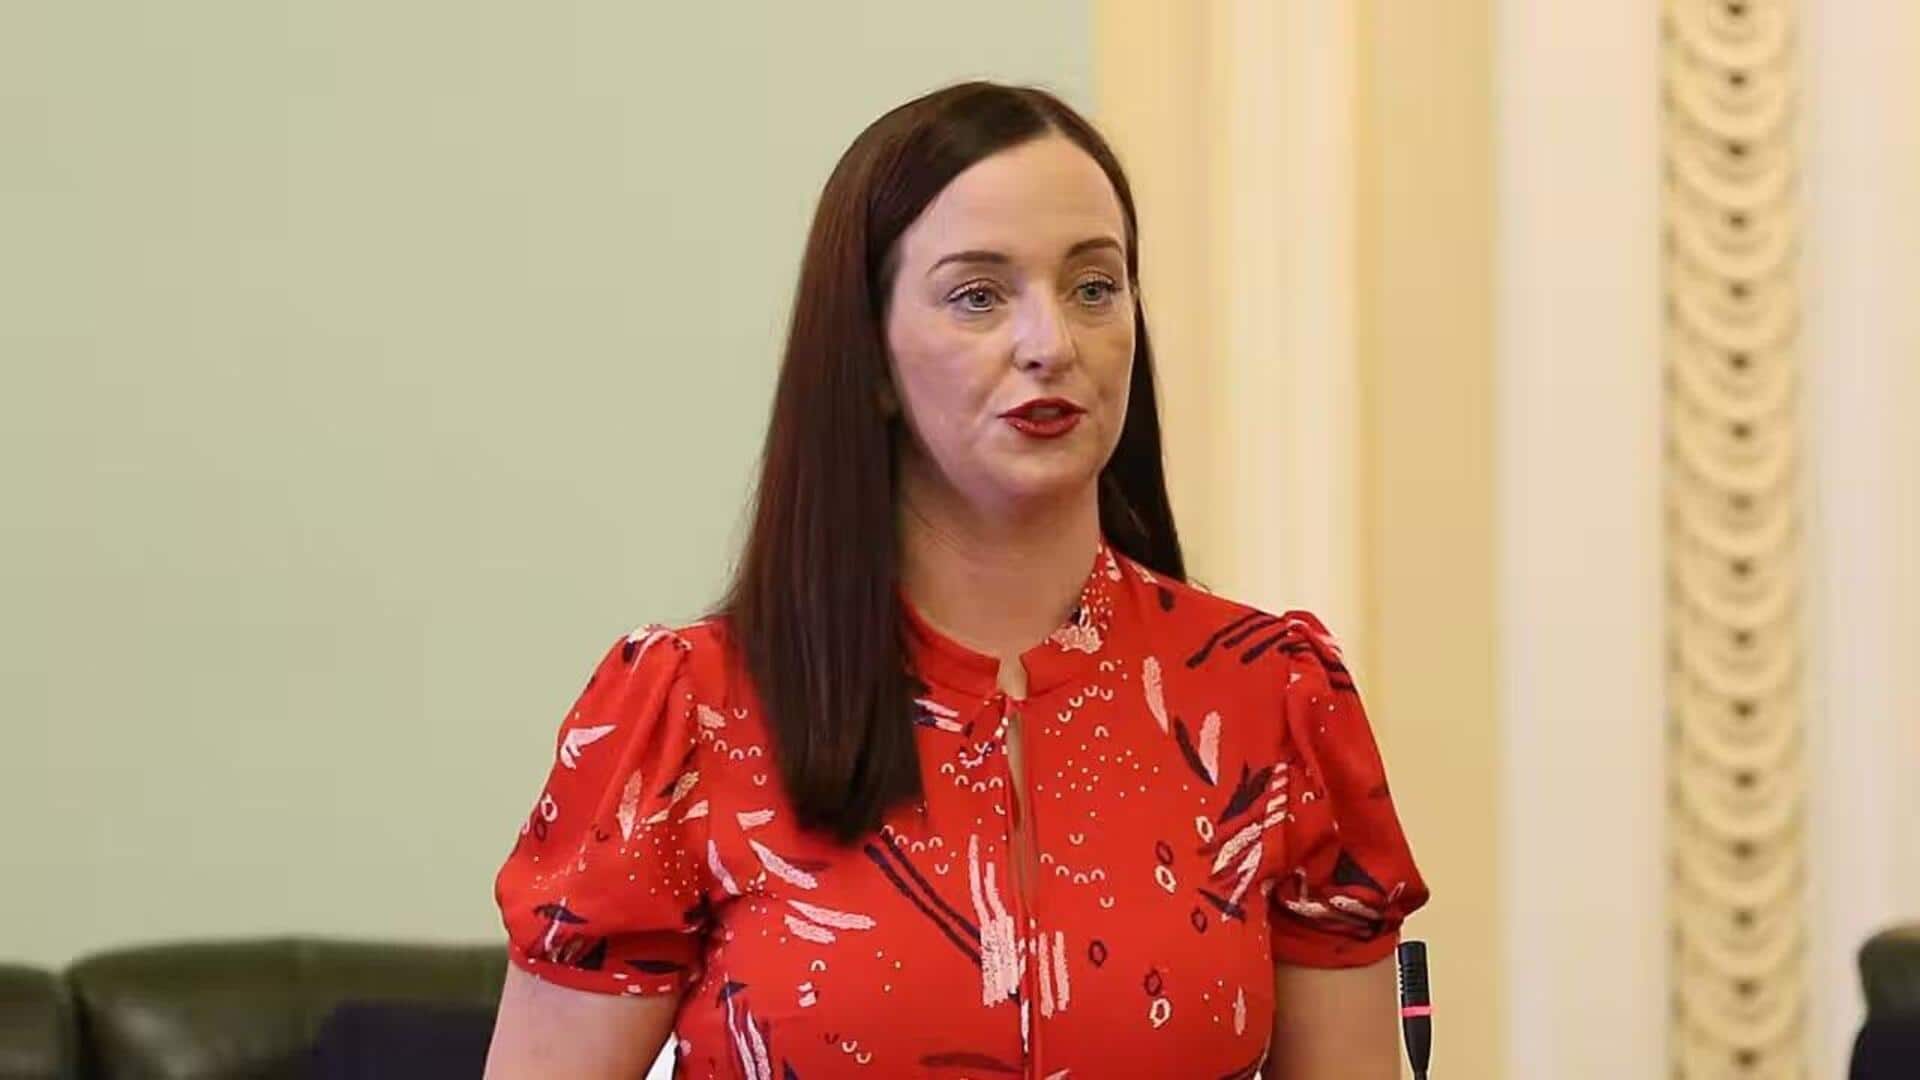 Australia: Queensland MP claims she was drugged, sexually assaulted